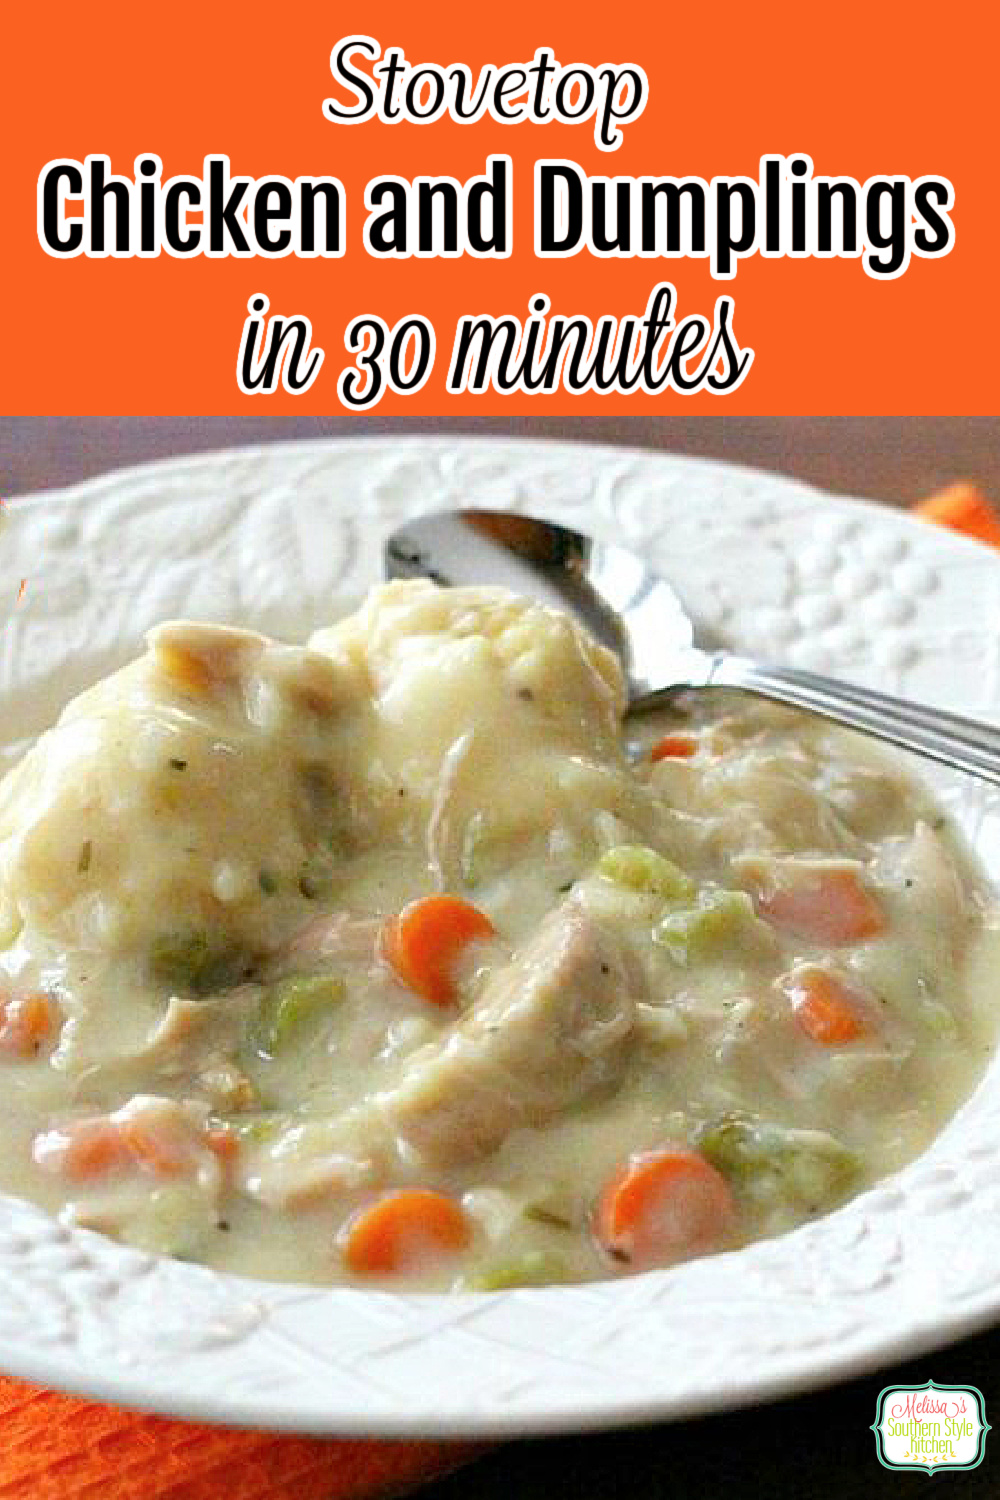 You can have this comforting Stovetop Chicken and Dumplings ready to eat in 30 minutes #chickenanddumplings #chicken #easychickenrecipes #dumplings #30minutemeals #dinner #dinnerideas #southernfood #southernrecipes #chuckendumplings